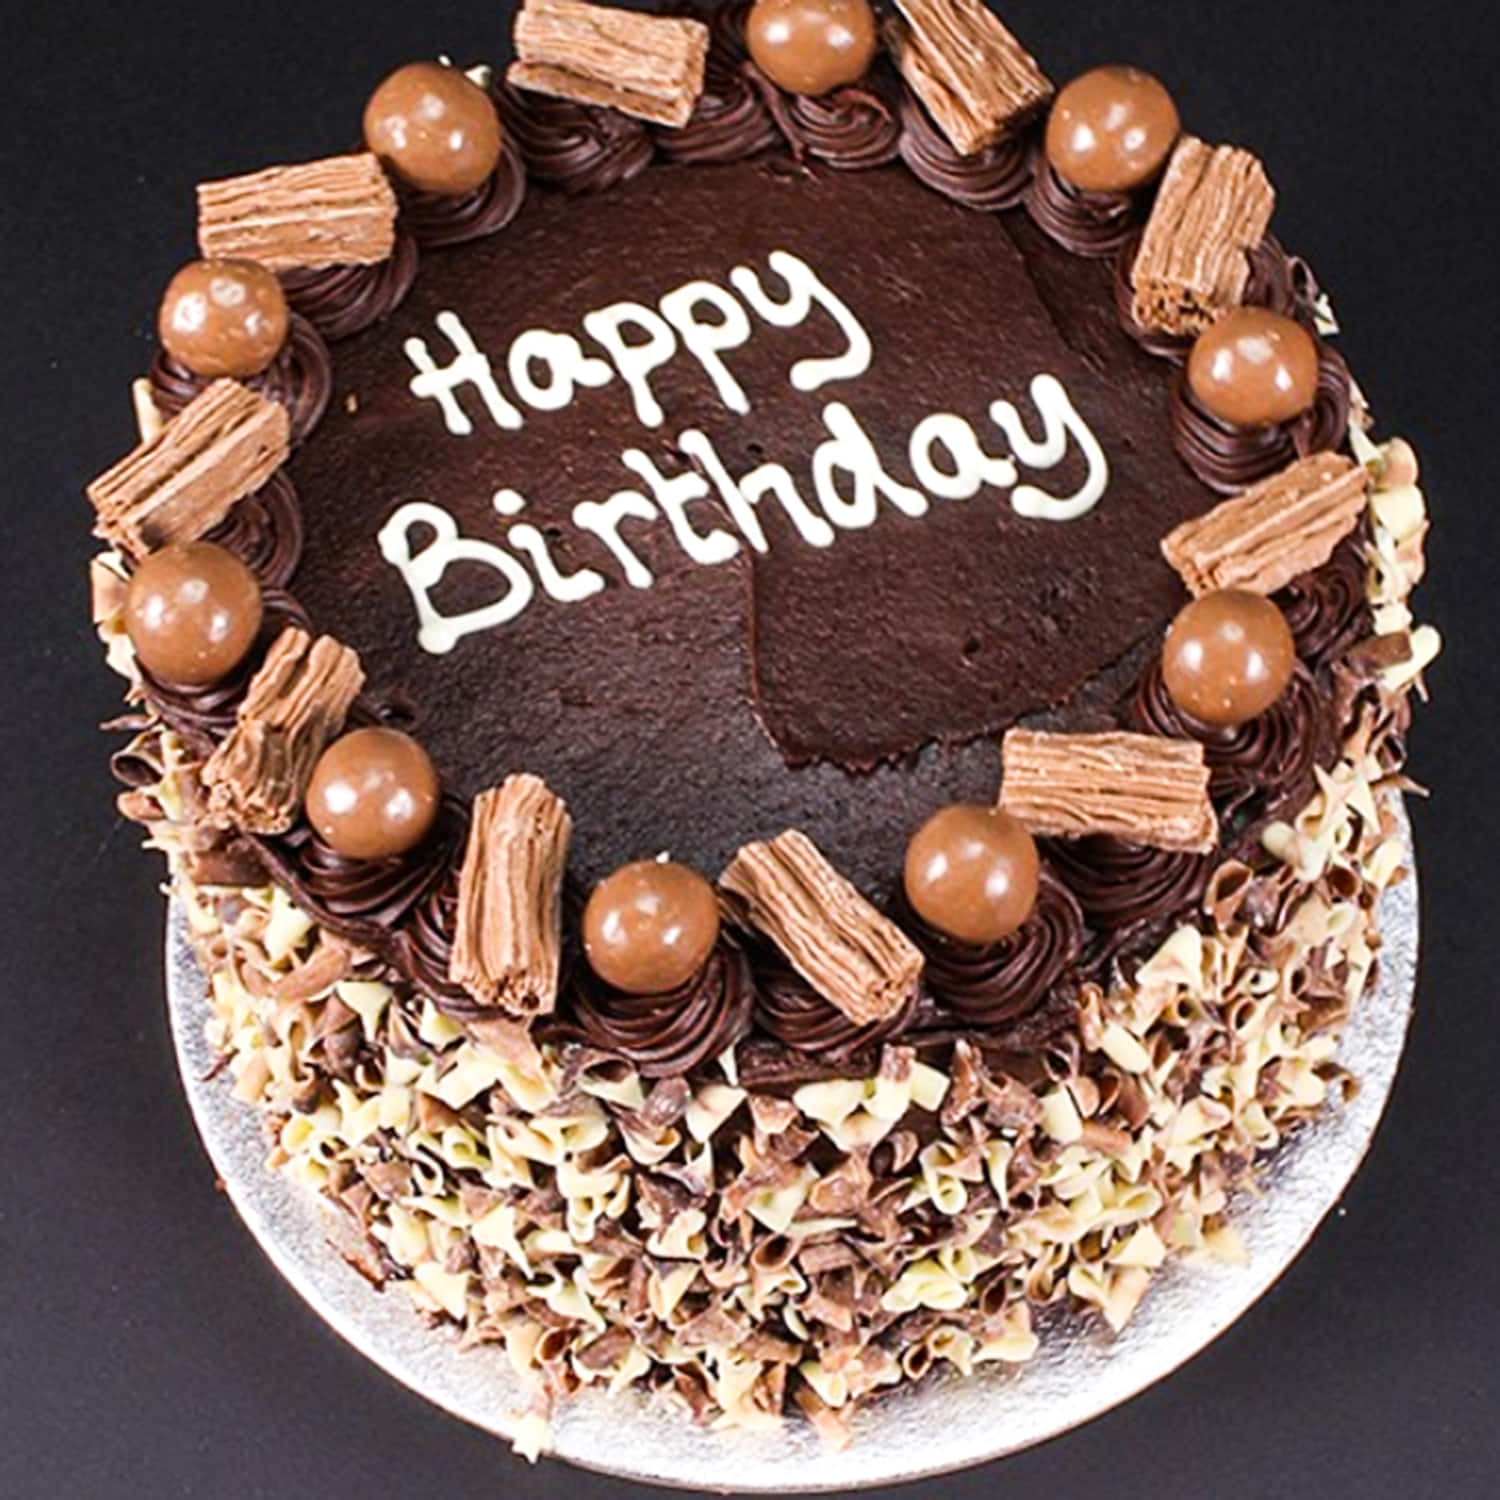 Cake Delivery UK | Send Cakes to United Kingdom - FNP